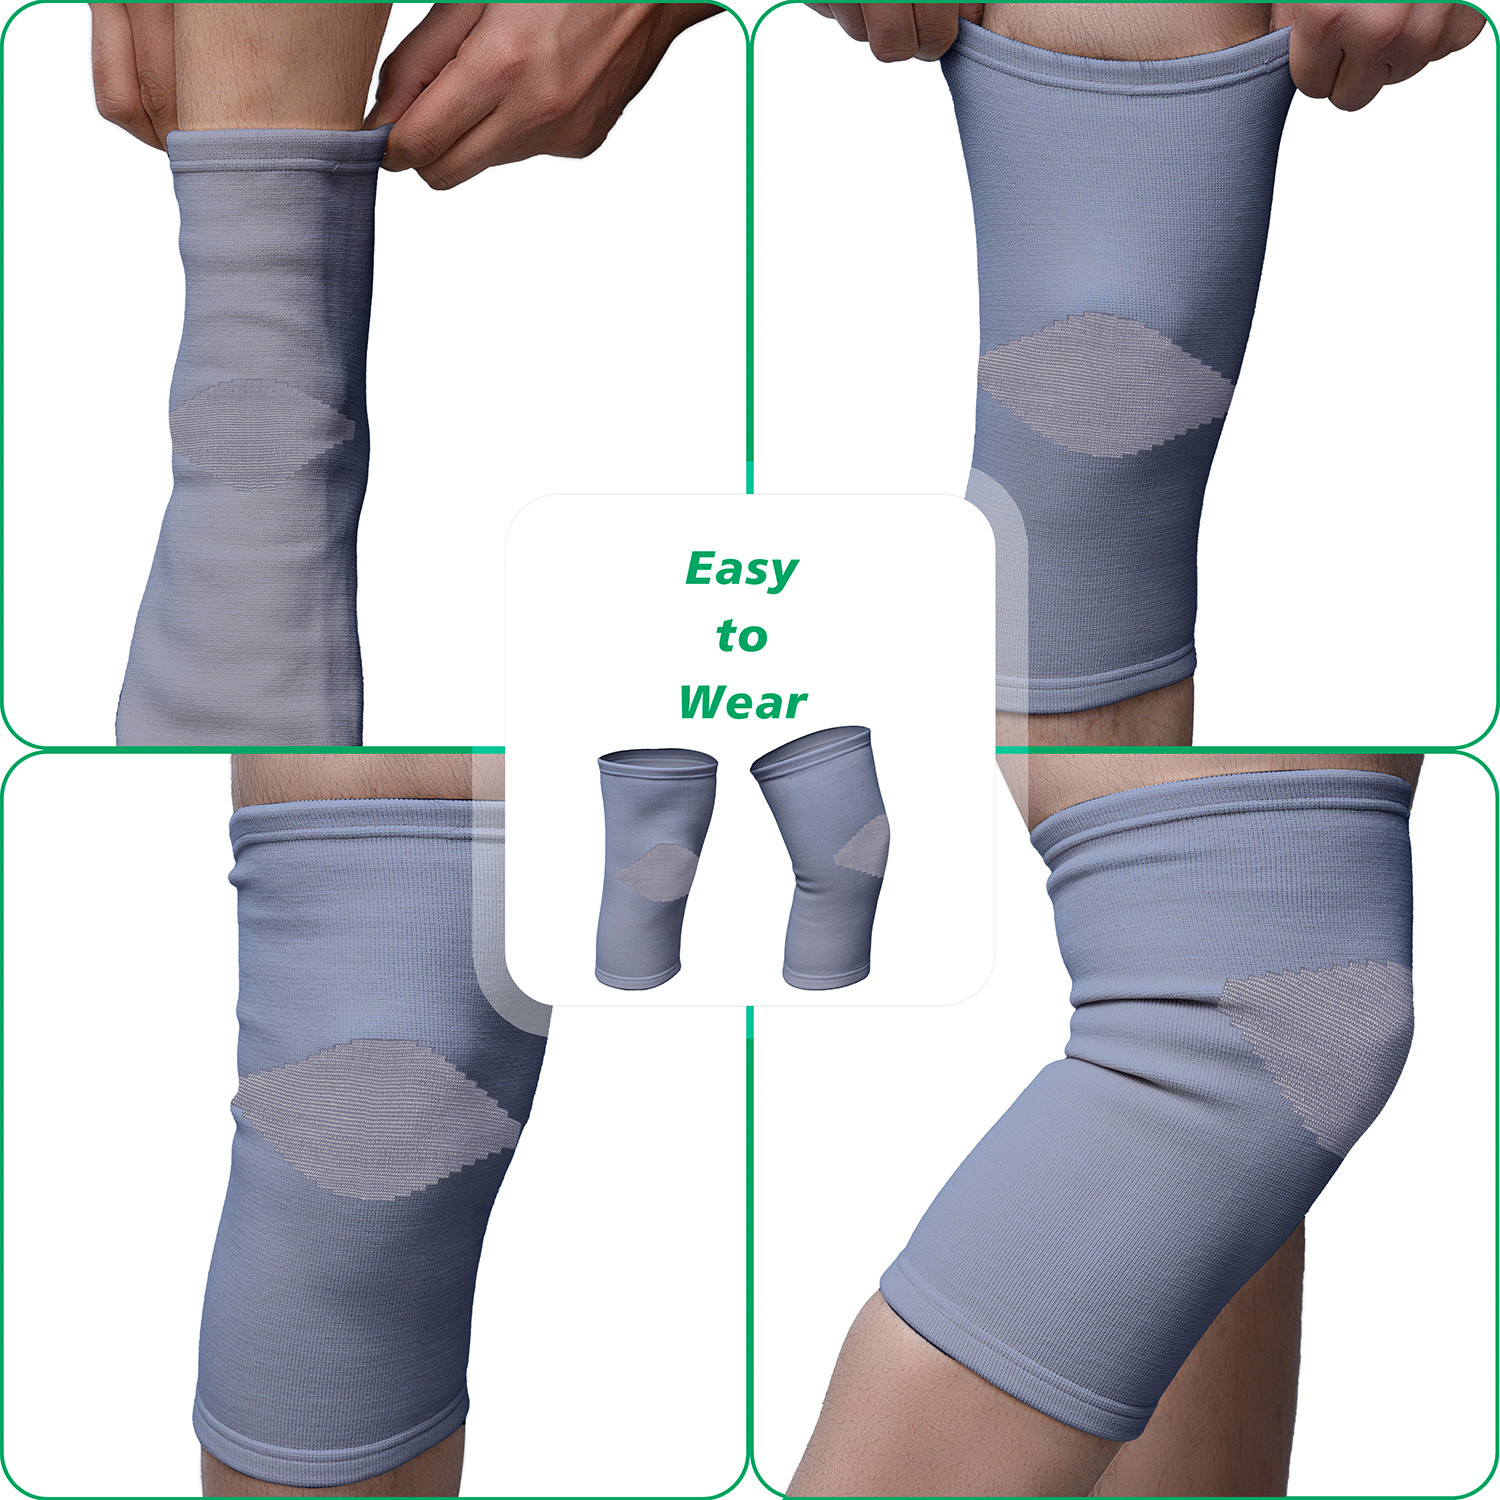 Kuber Industries 3D Knee Cap | Cotton Knee Sleeves |Sleeves For Joint Pain | Sleeves For Arthritis Relief | Unisex Knee Wraps | Knee Bands | Size-M | 1 Pair | Gray & White